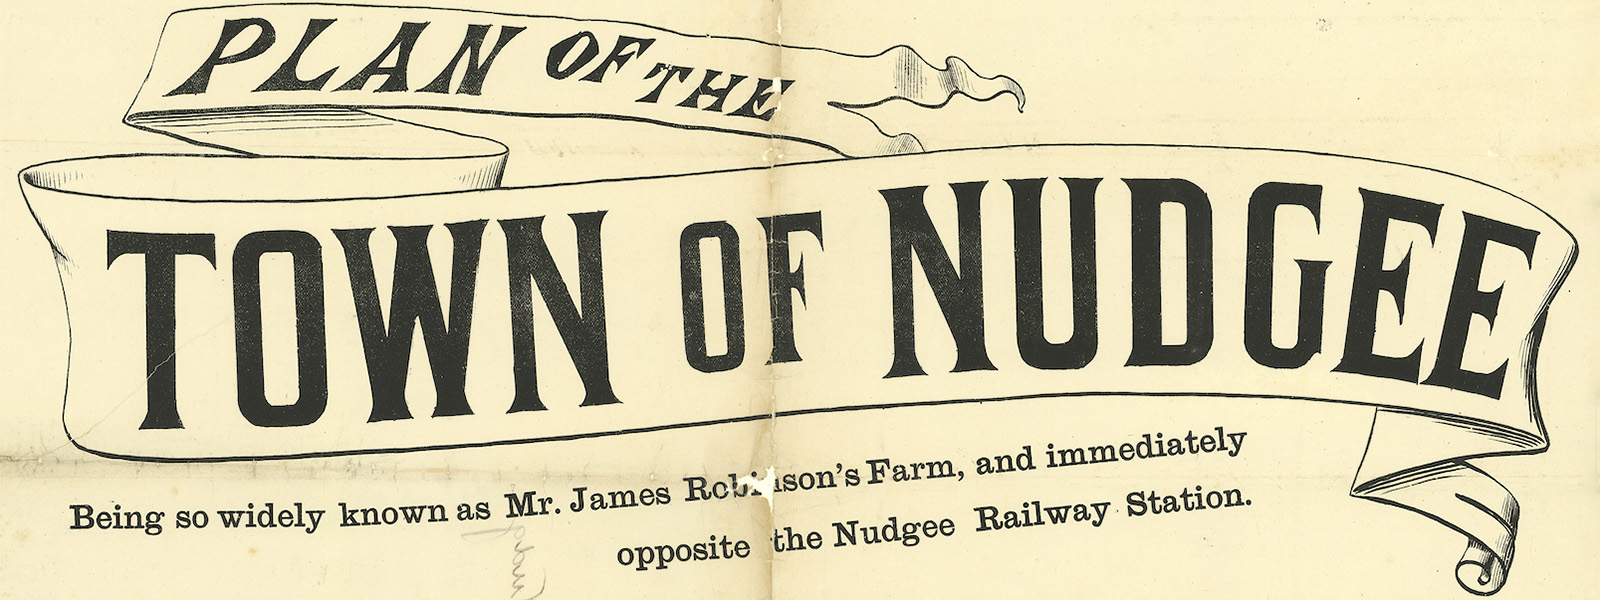 Historic advertisment - Plan of the town of Nudgee. Being so widely known as Mr. James Robinson's Farm, and immediately opposite the Nudgee Railway Station.